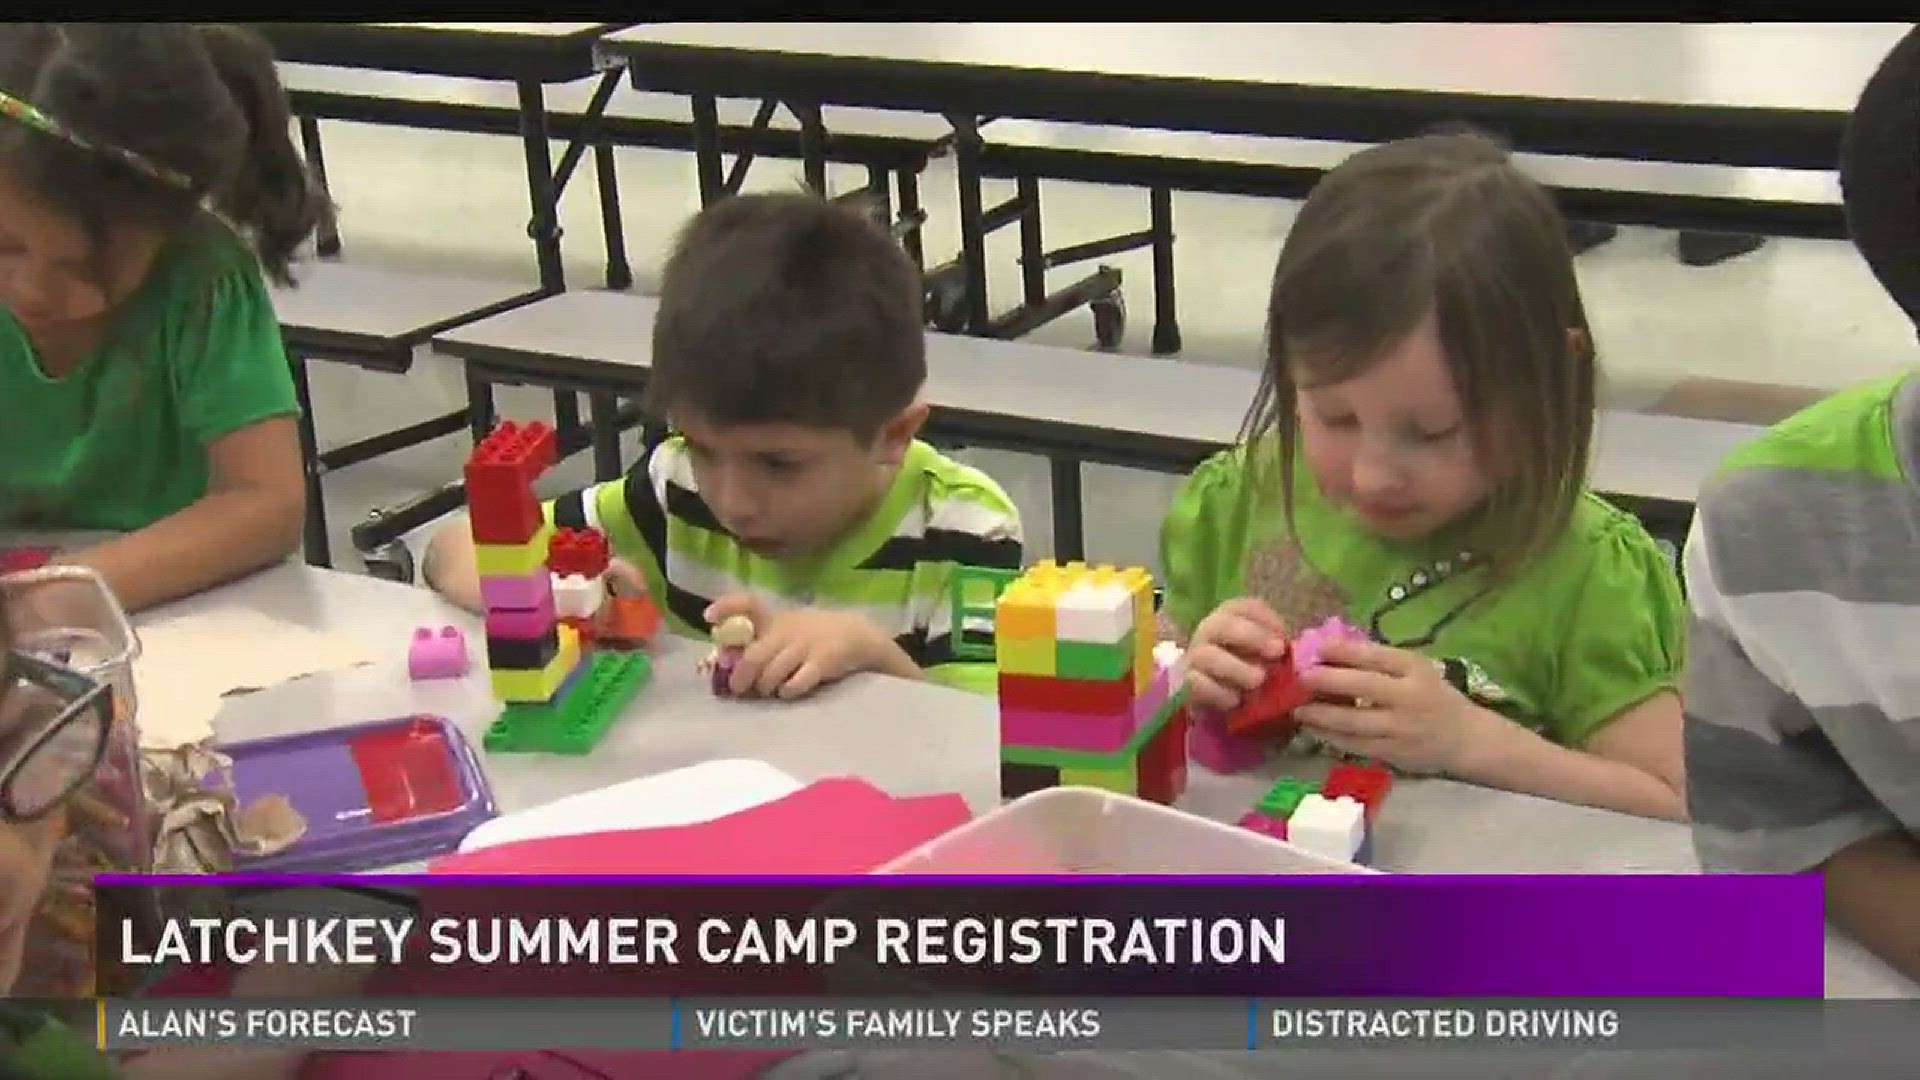 arents with young children looking to keep their kids entertained this summer can benefit from the Corpus Christi Parks and Recreation Department's Latchkey summer camps program.